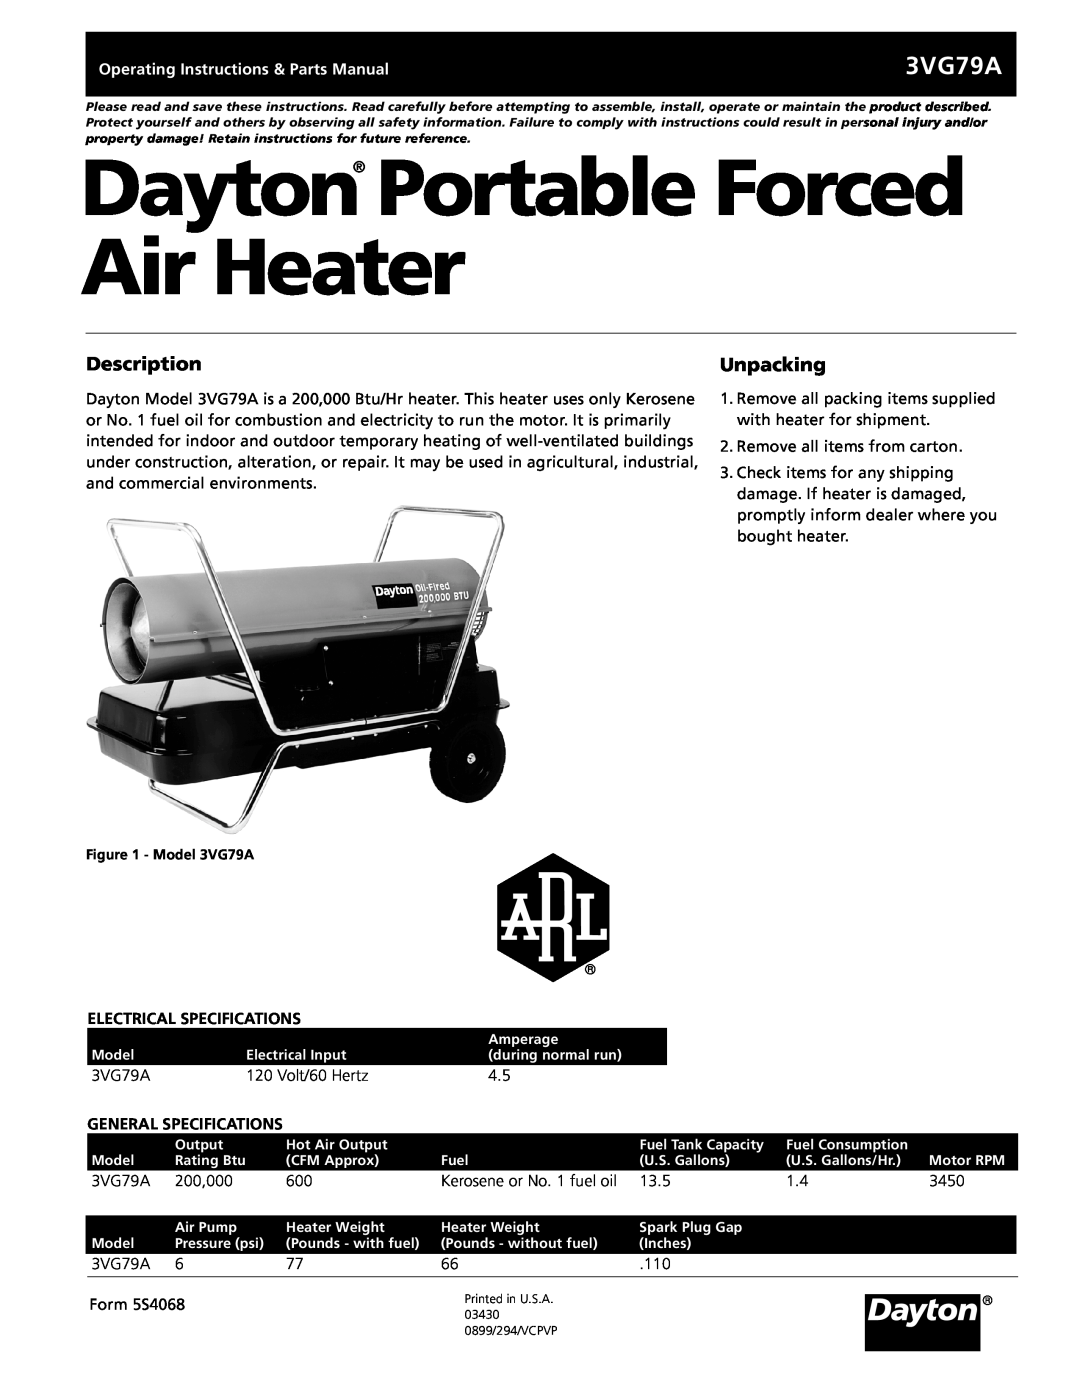 Dayton 3VG79A specifications Dayton Portable Forced Air Heater, Description, Unpacking, General Specifications 